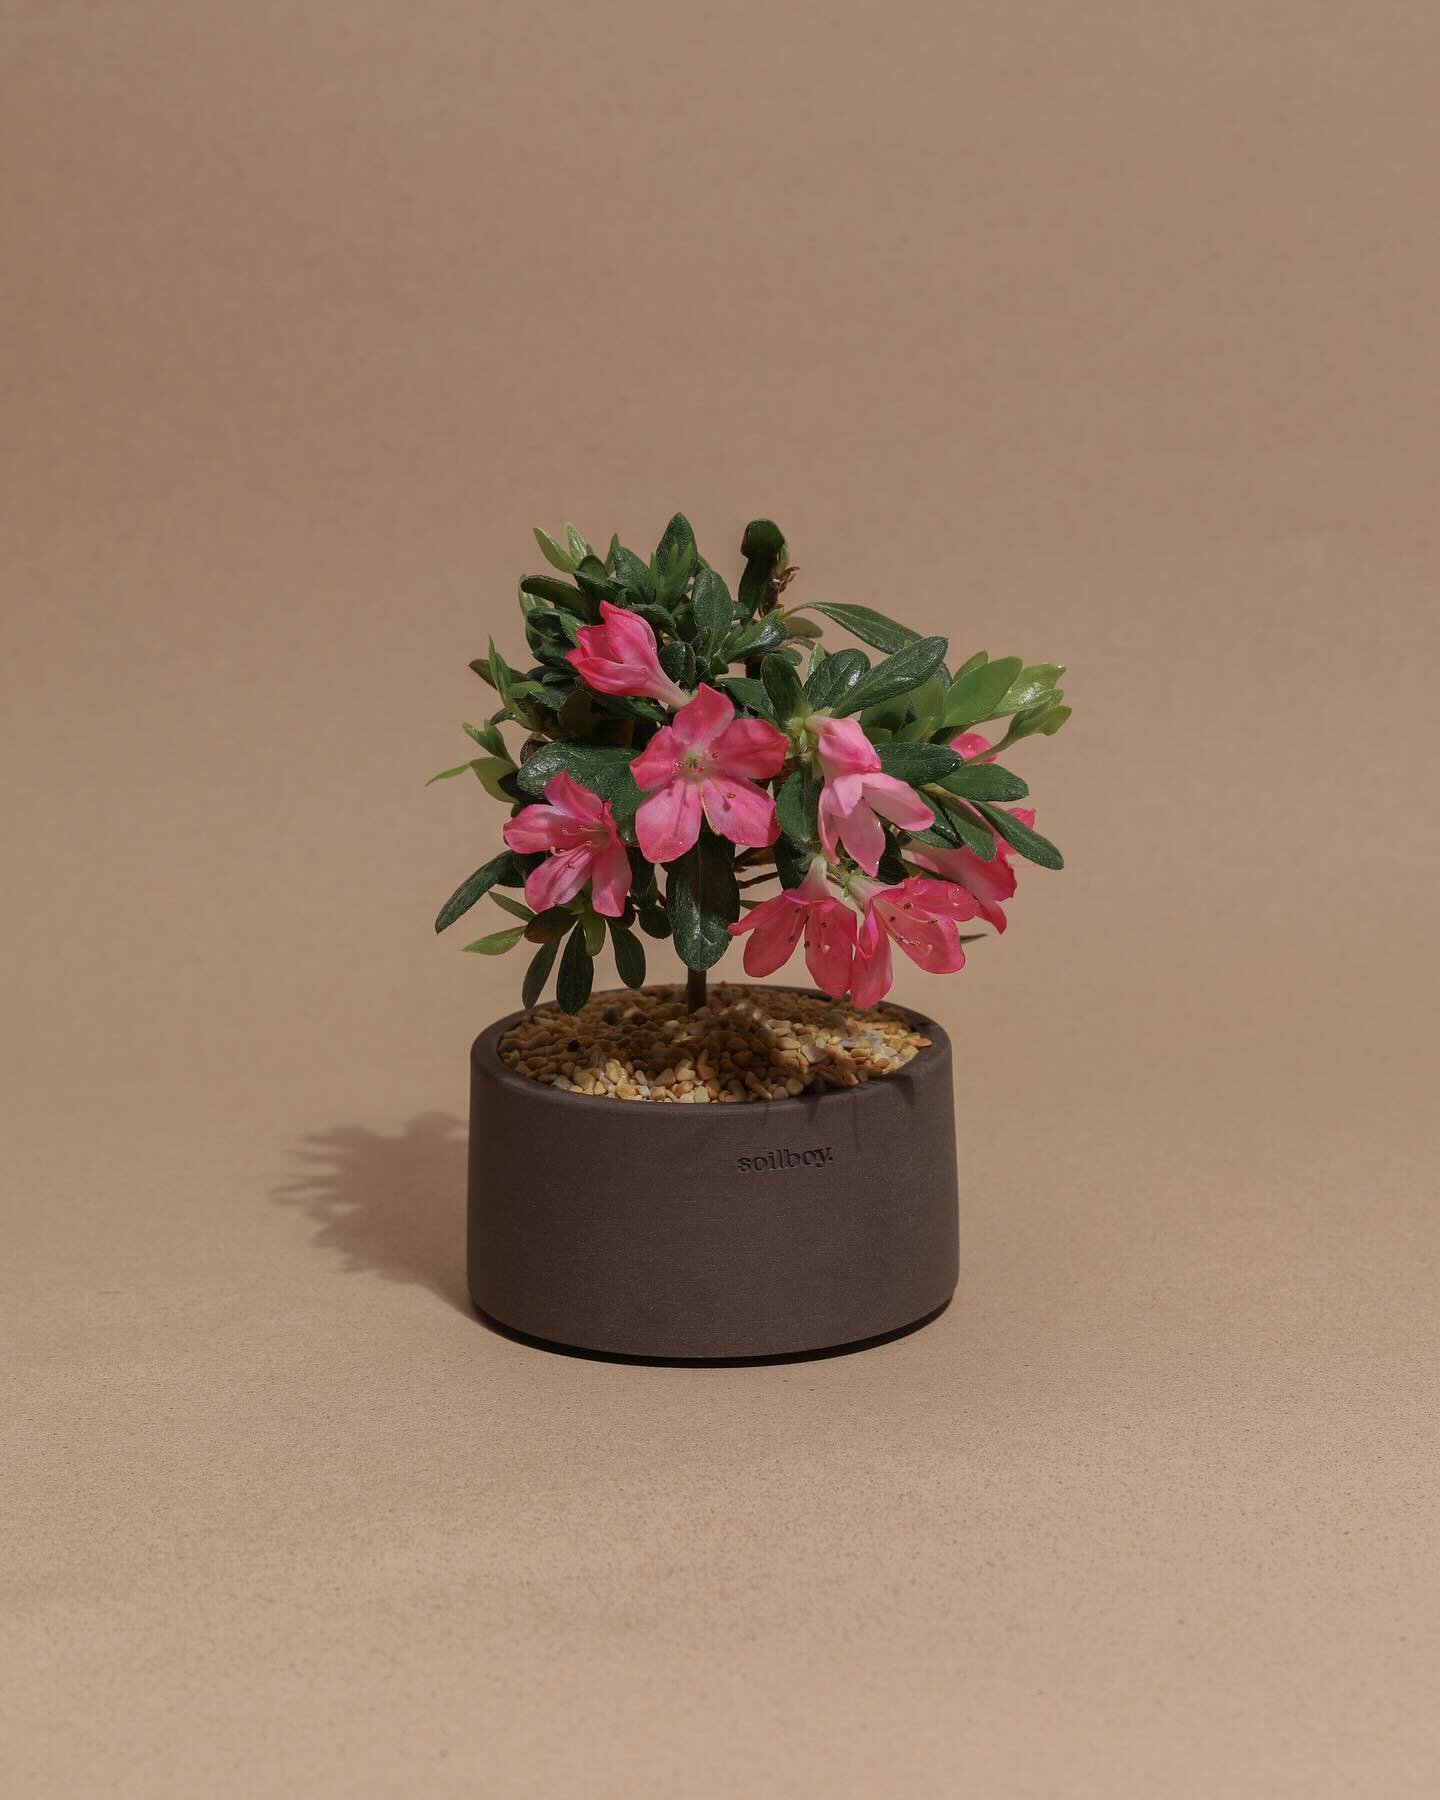 The Japanese Azalea Bonsai, a small evergreen shrub with vibrant pink or white flowers. They blooms from late March to early June, announcing the arrival of Spring! 🌸🌿 

Exclusively in handmade planters in South Korea 🇰🇷

#bonsai #plants #plantso